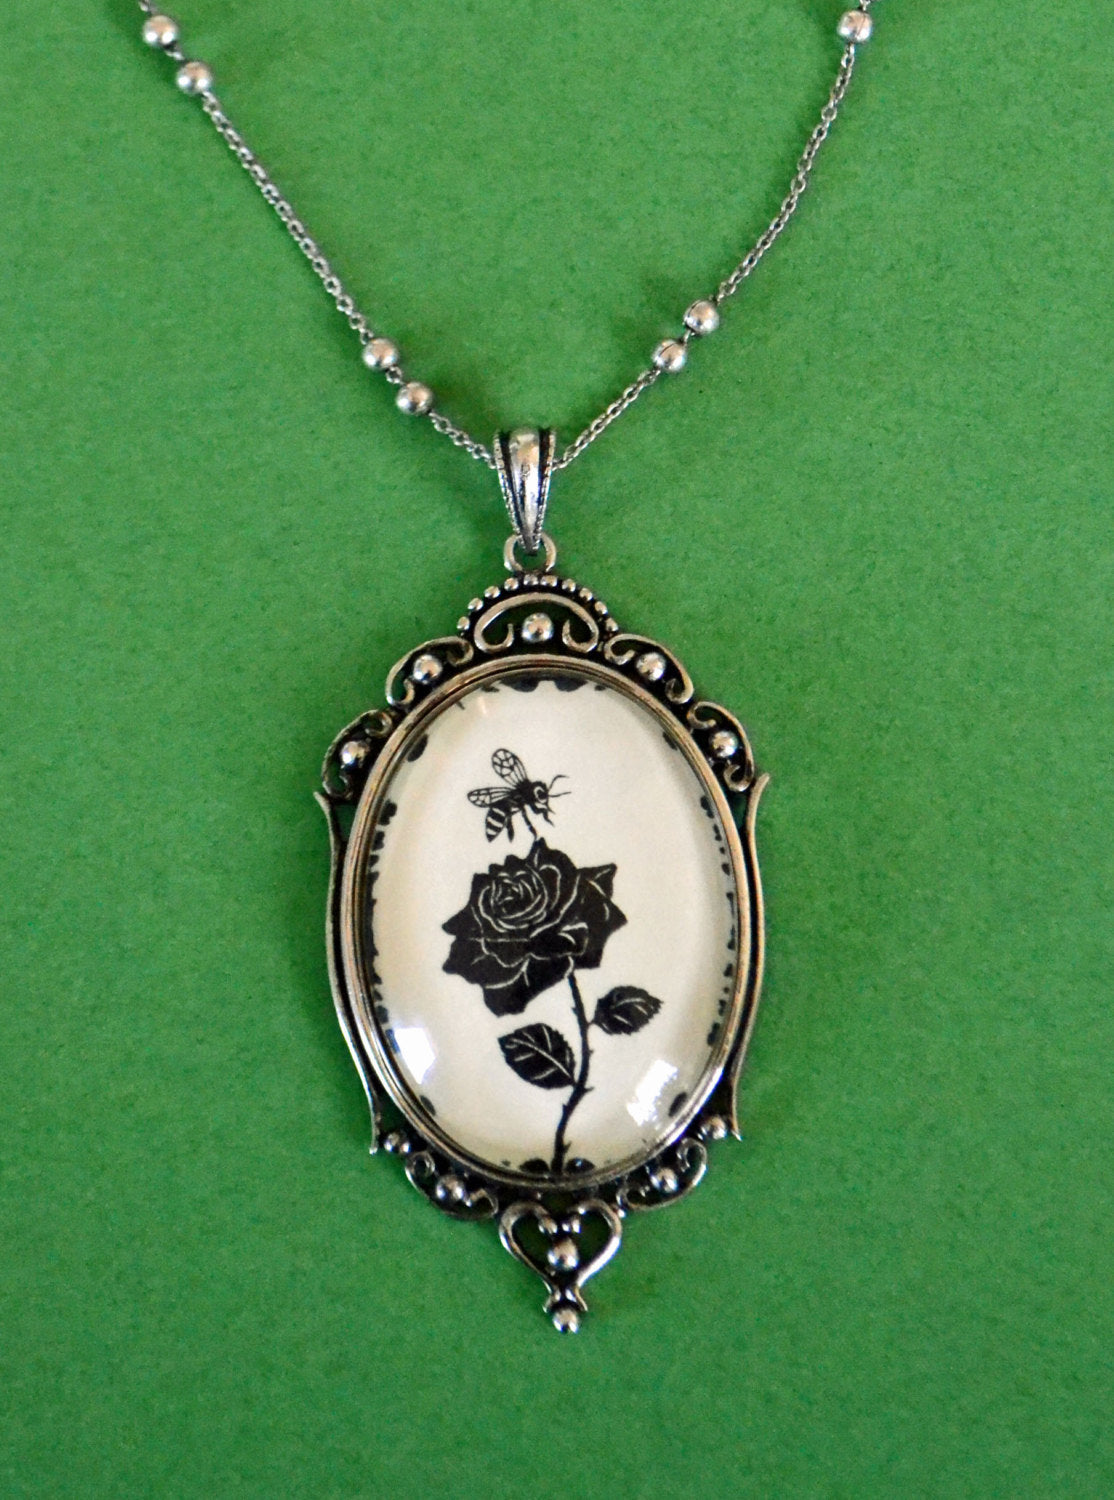 The BEE and the ROSE Necklace - pendant on chain - Silhouette Jewelry